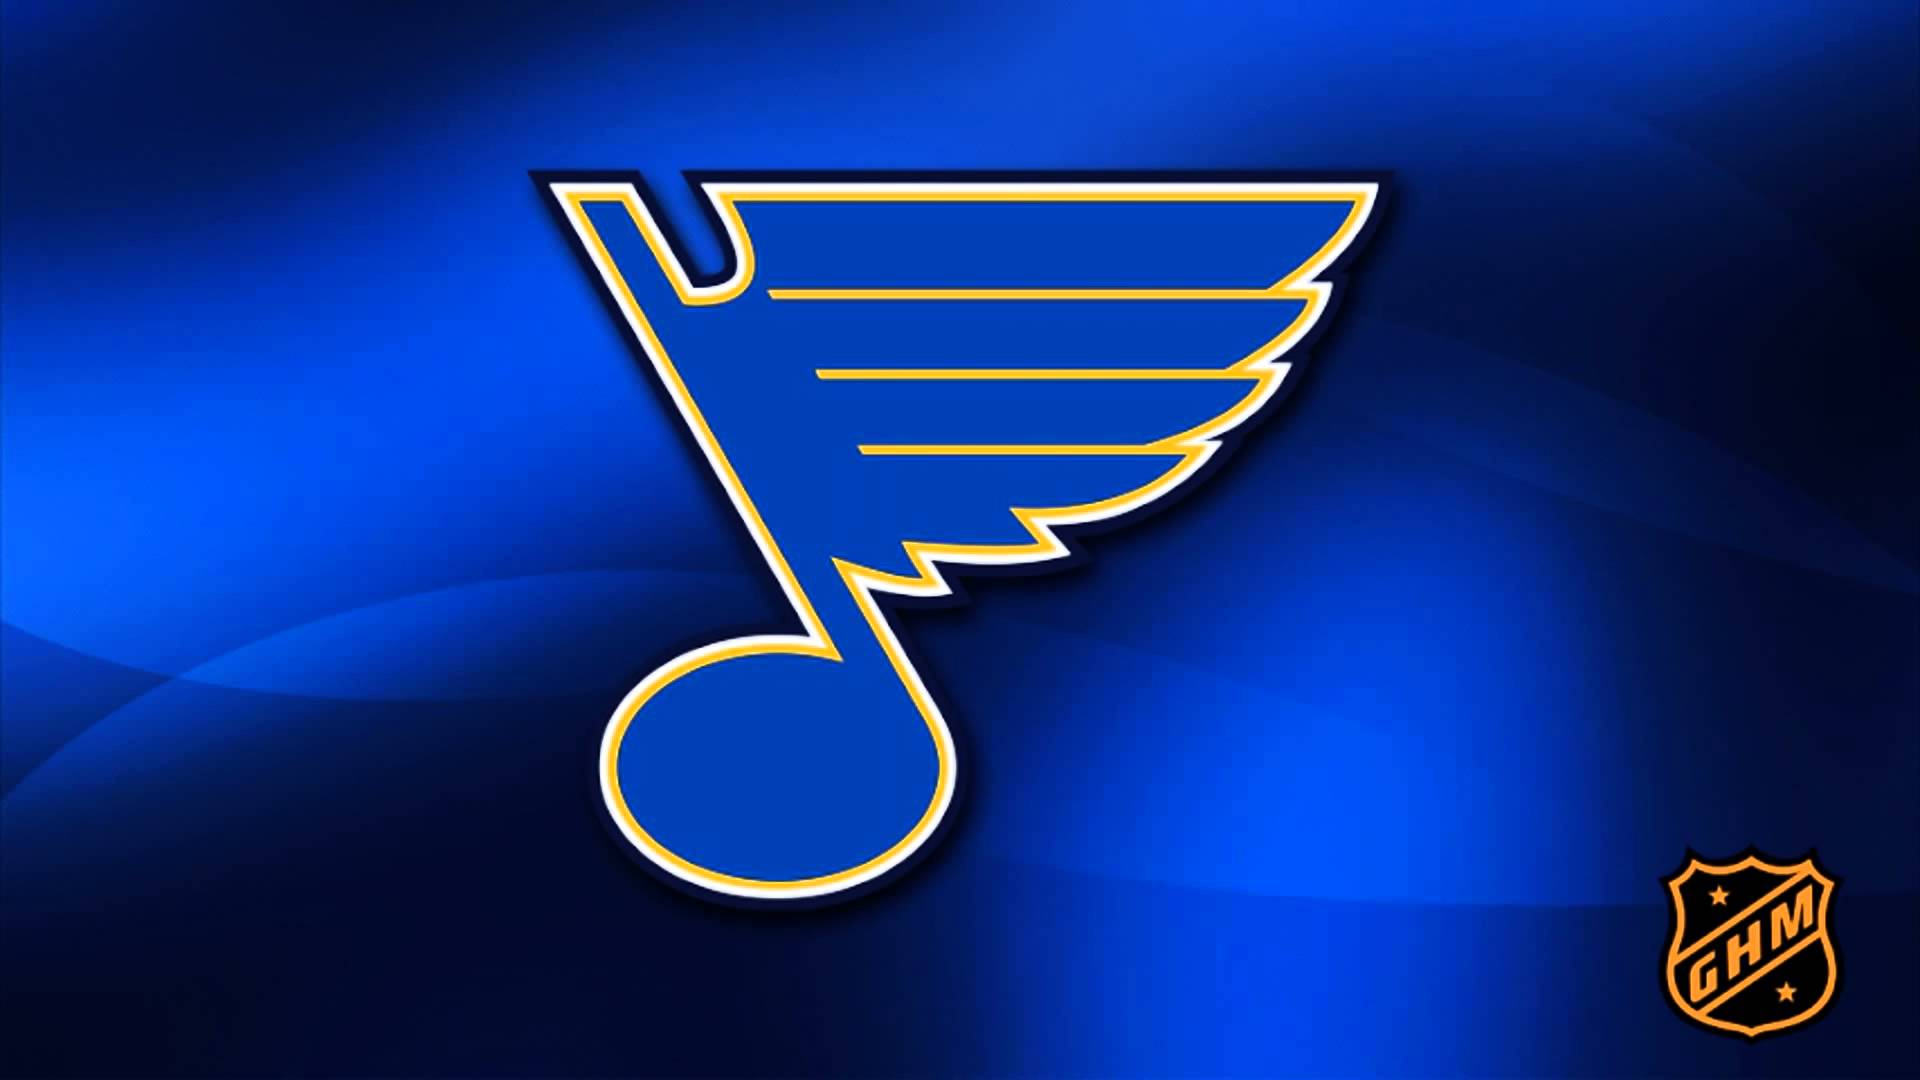 St Louis Blues Wallpaper Pictures To Pin